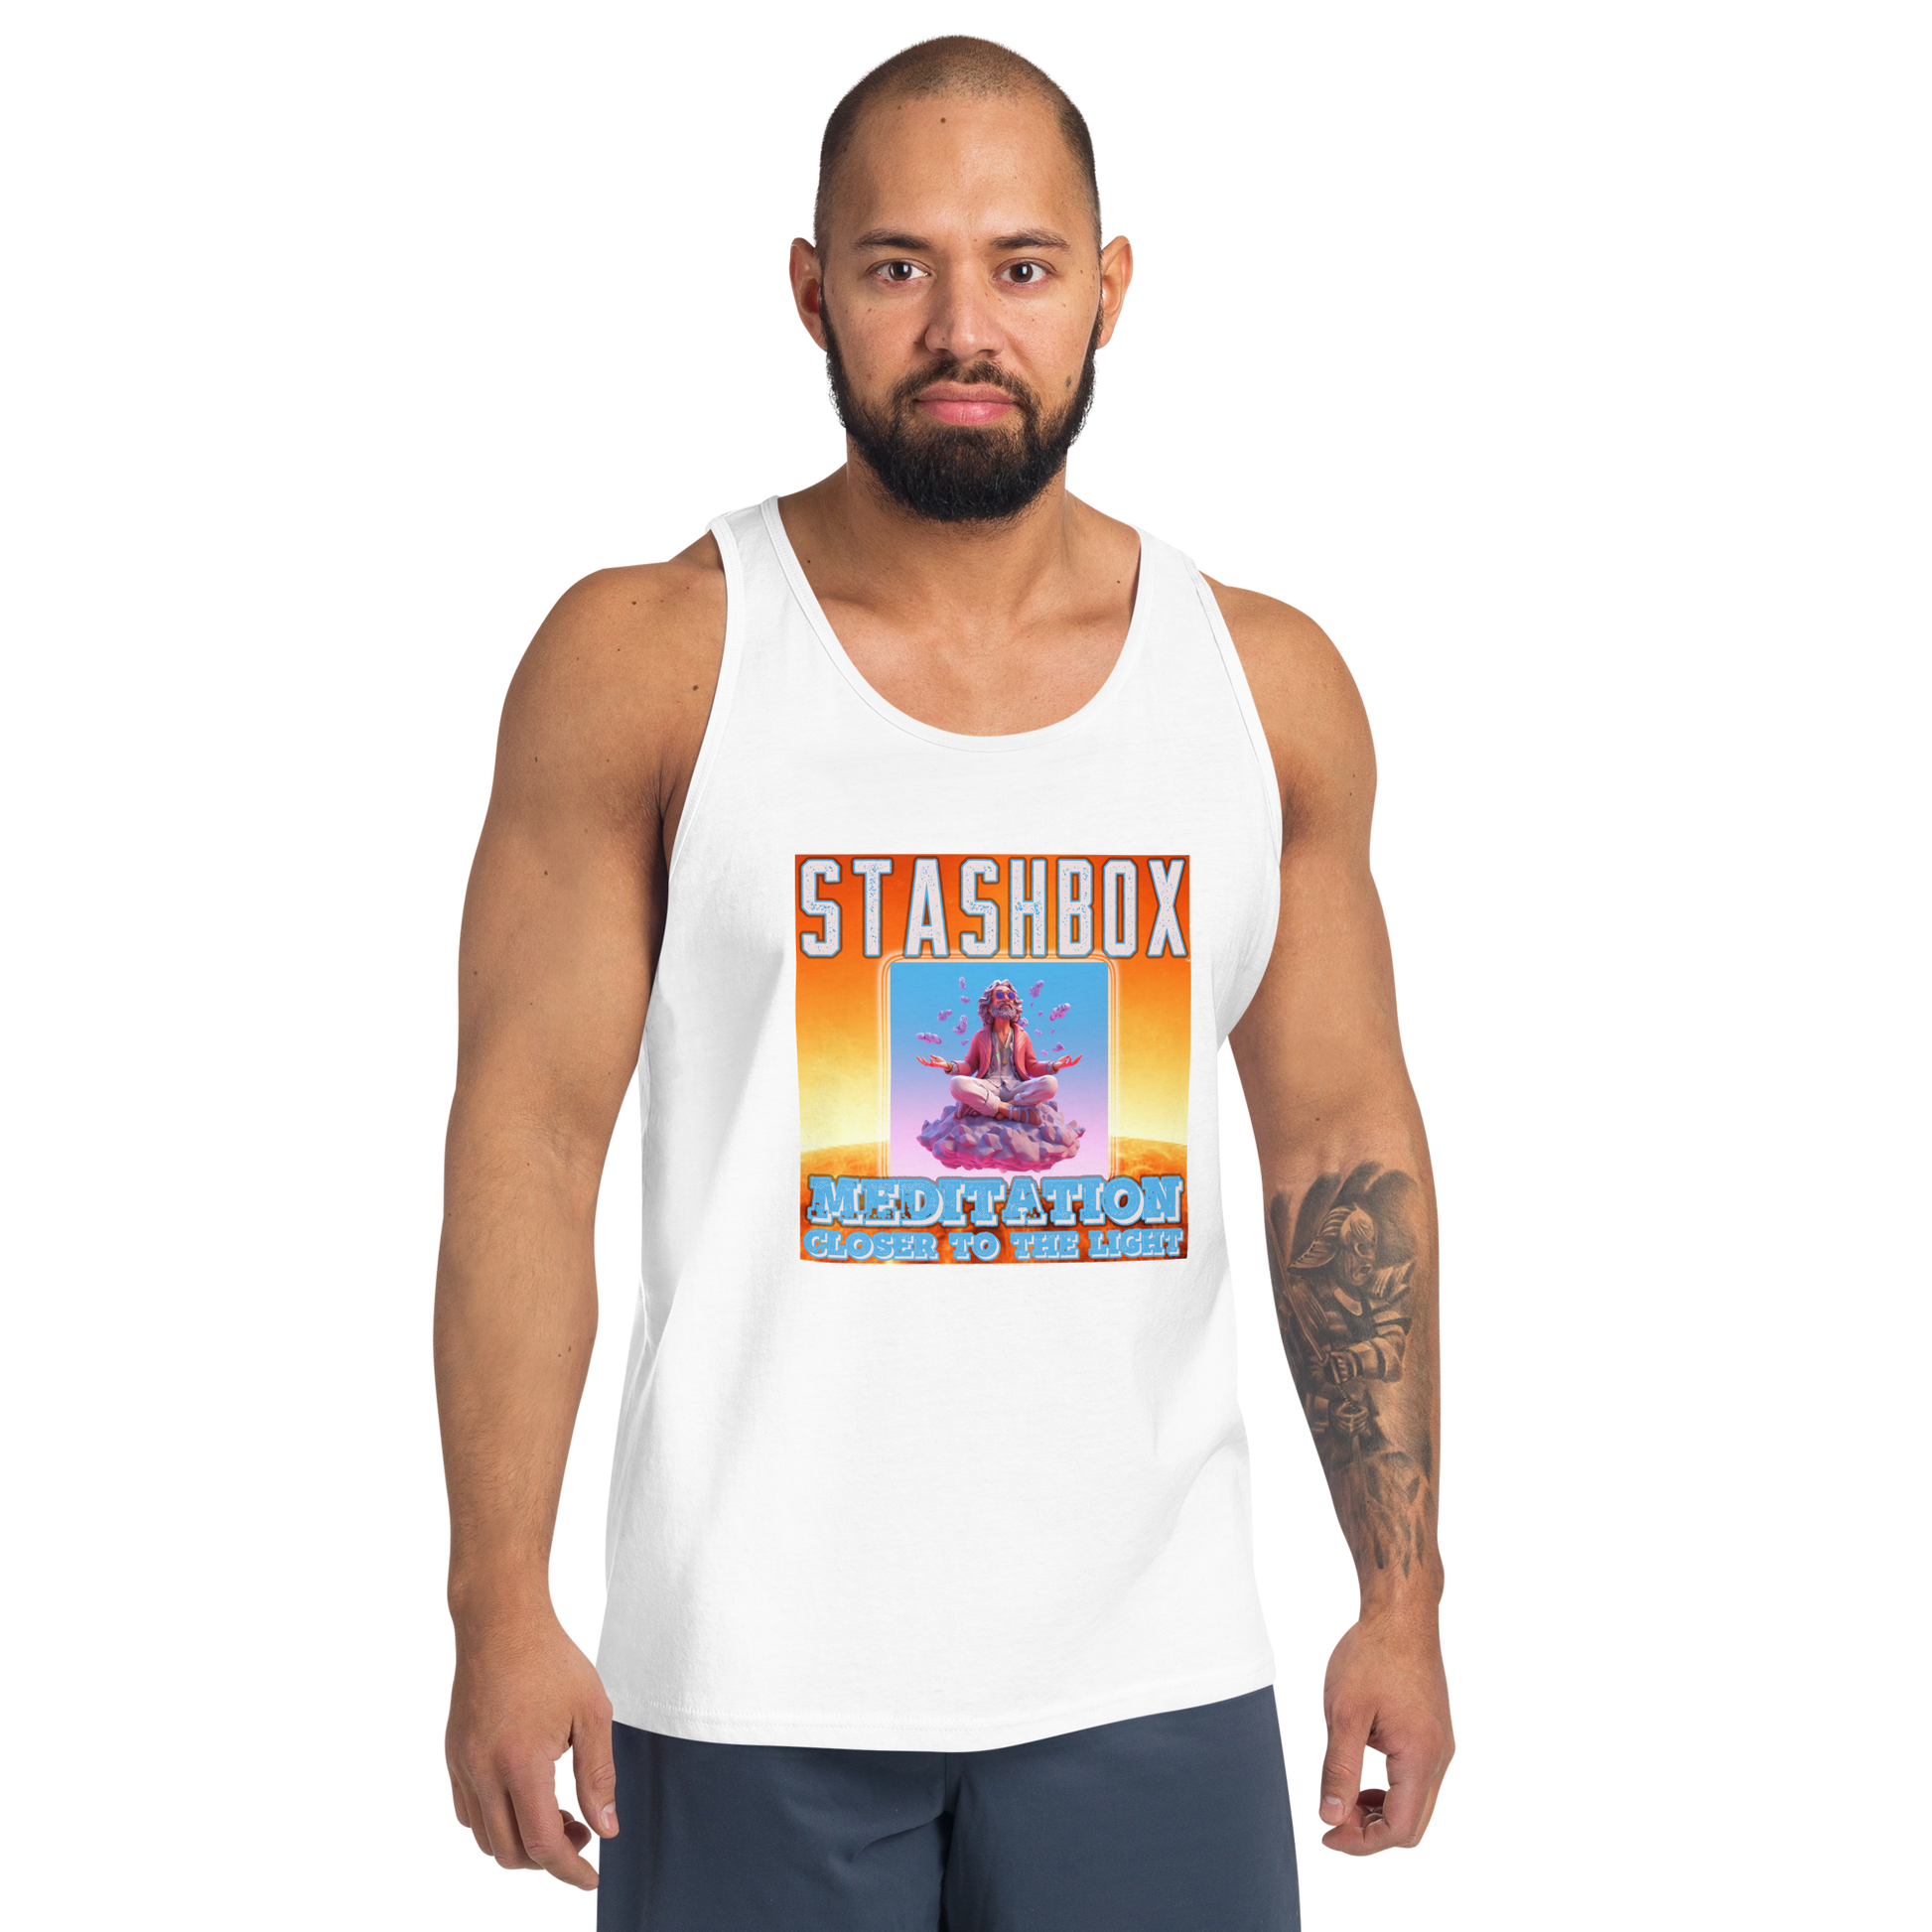 Immerse yourself in calmness with our Artwork #003 Meditation: Closer To the Light Men's Tanktop Shirt. Your clothing, your embrace of inner stillness, exclusively at Stashbox.ai.